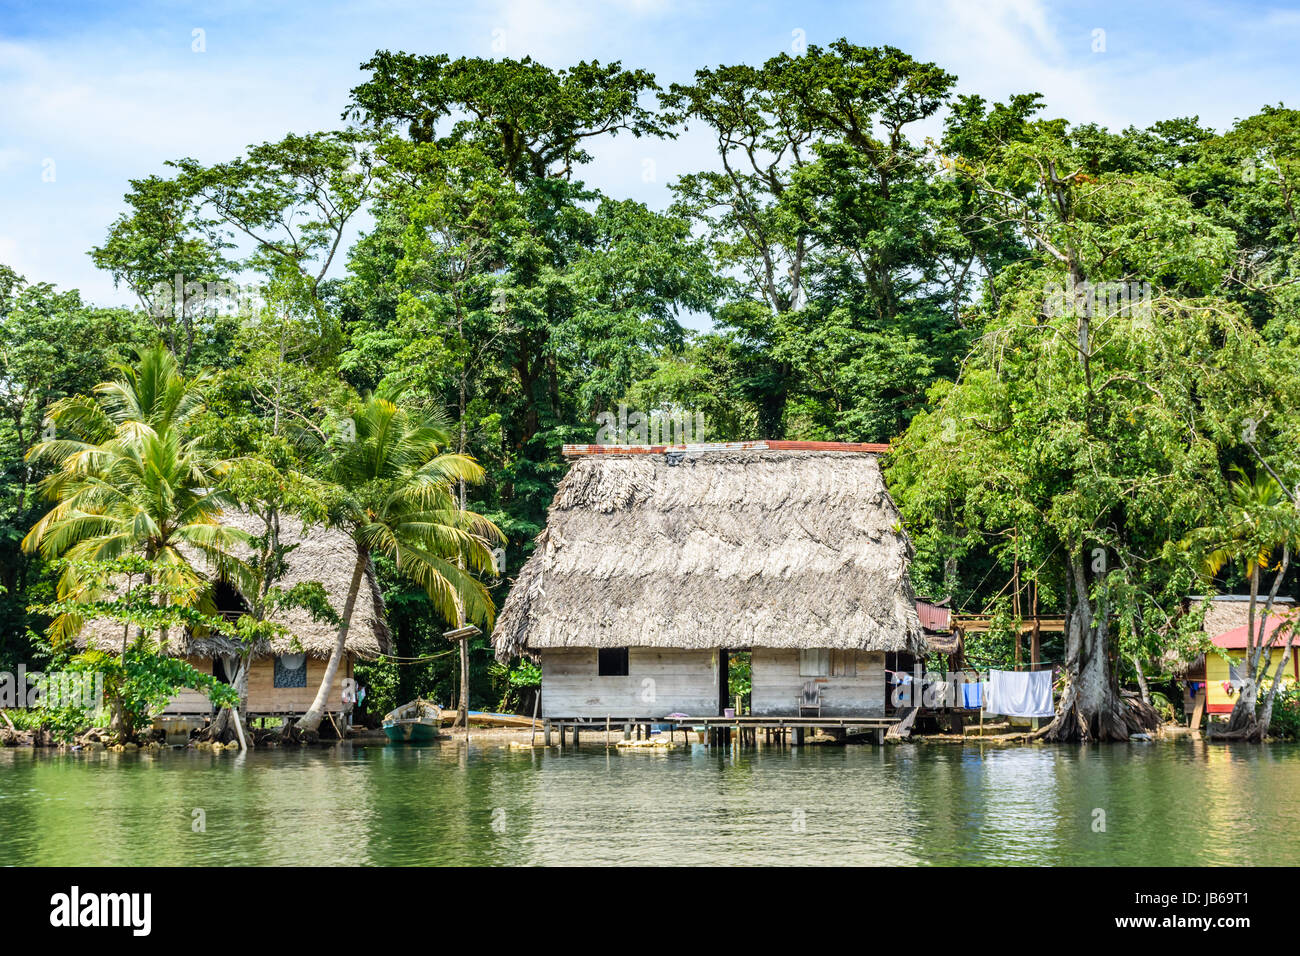 Rio Dulce, Guatemala - September 1, 2016: Wooden houses on stilts with palm leaf roofs on riverbank of the Rio Dulce in Guatemala, Central America Stock Photo